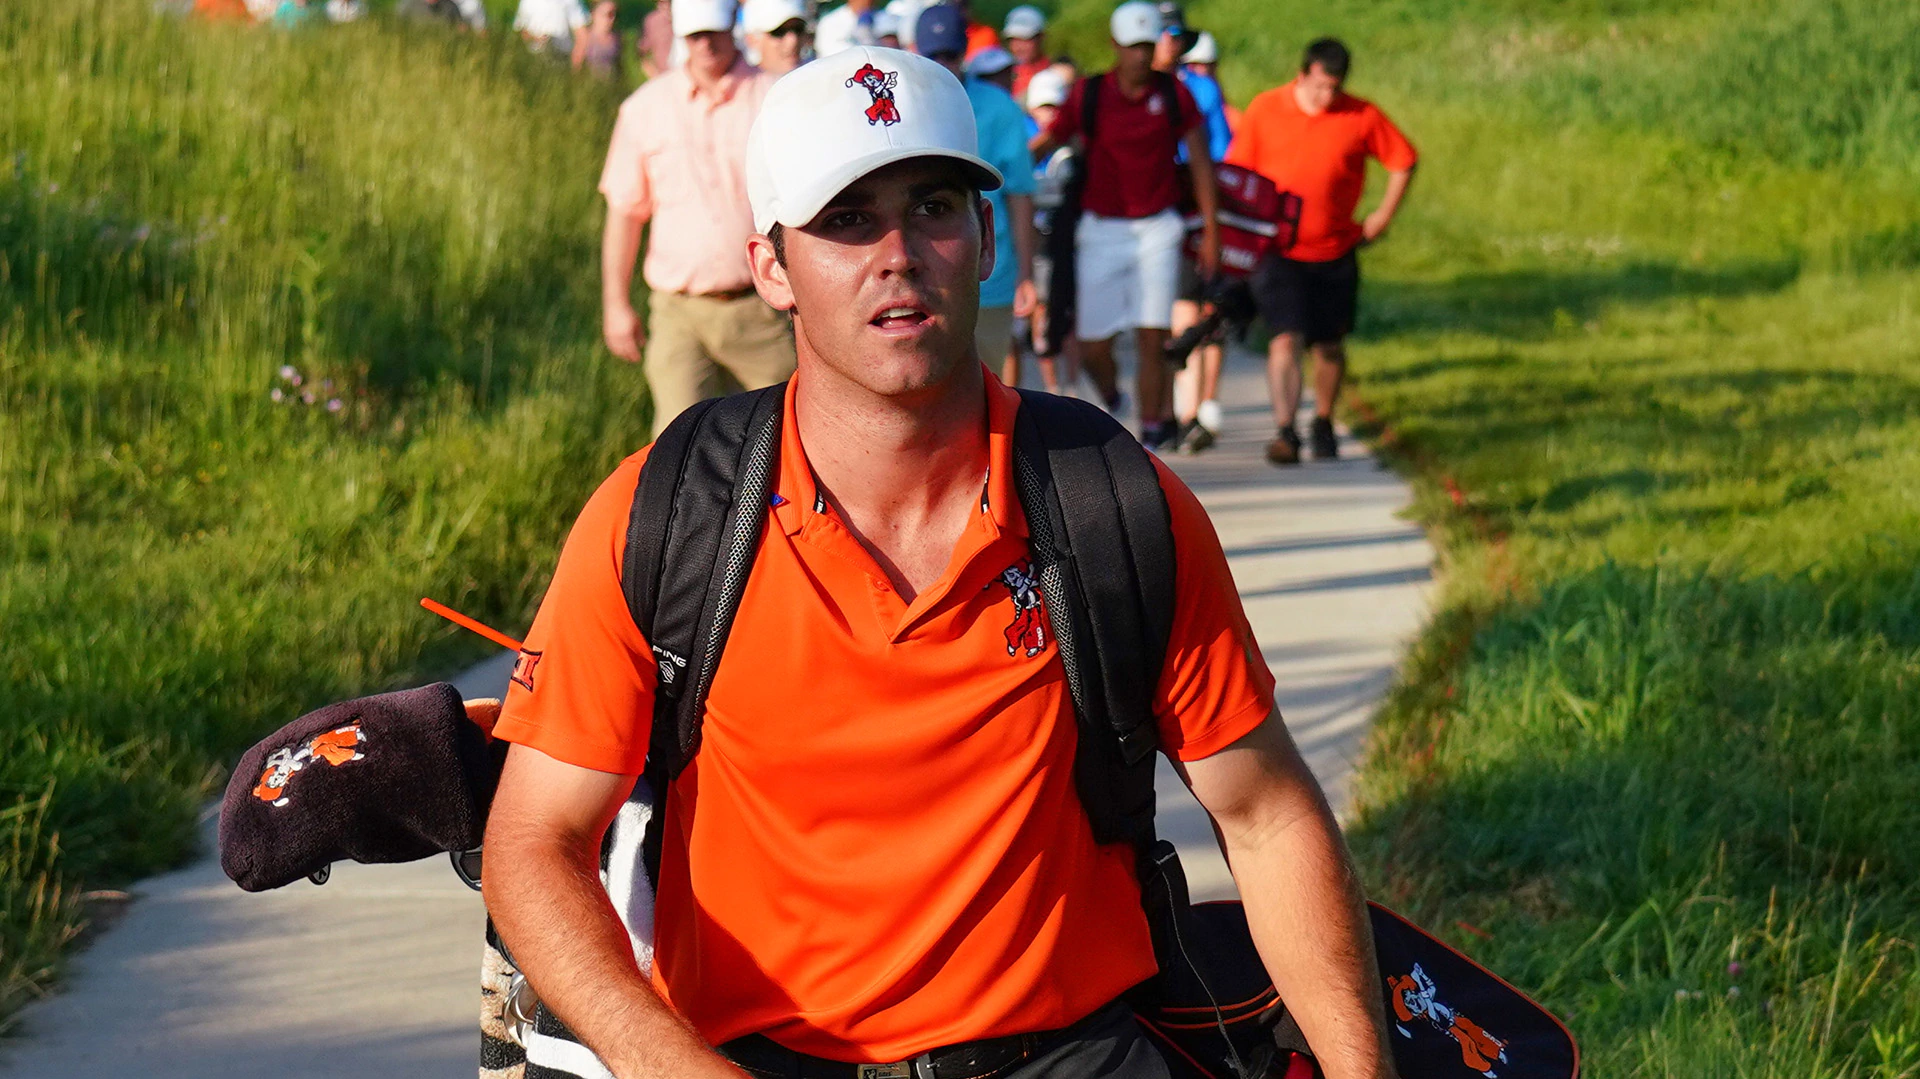 Lack of caddies may give Matthew Wolff an edge in charity skins match